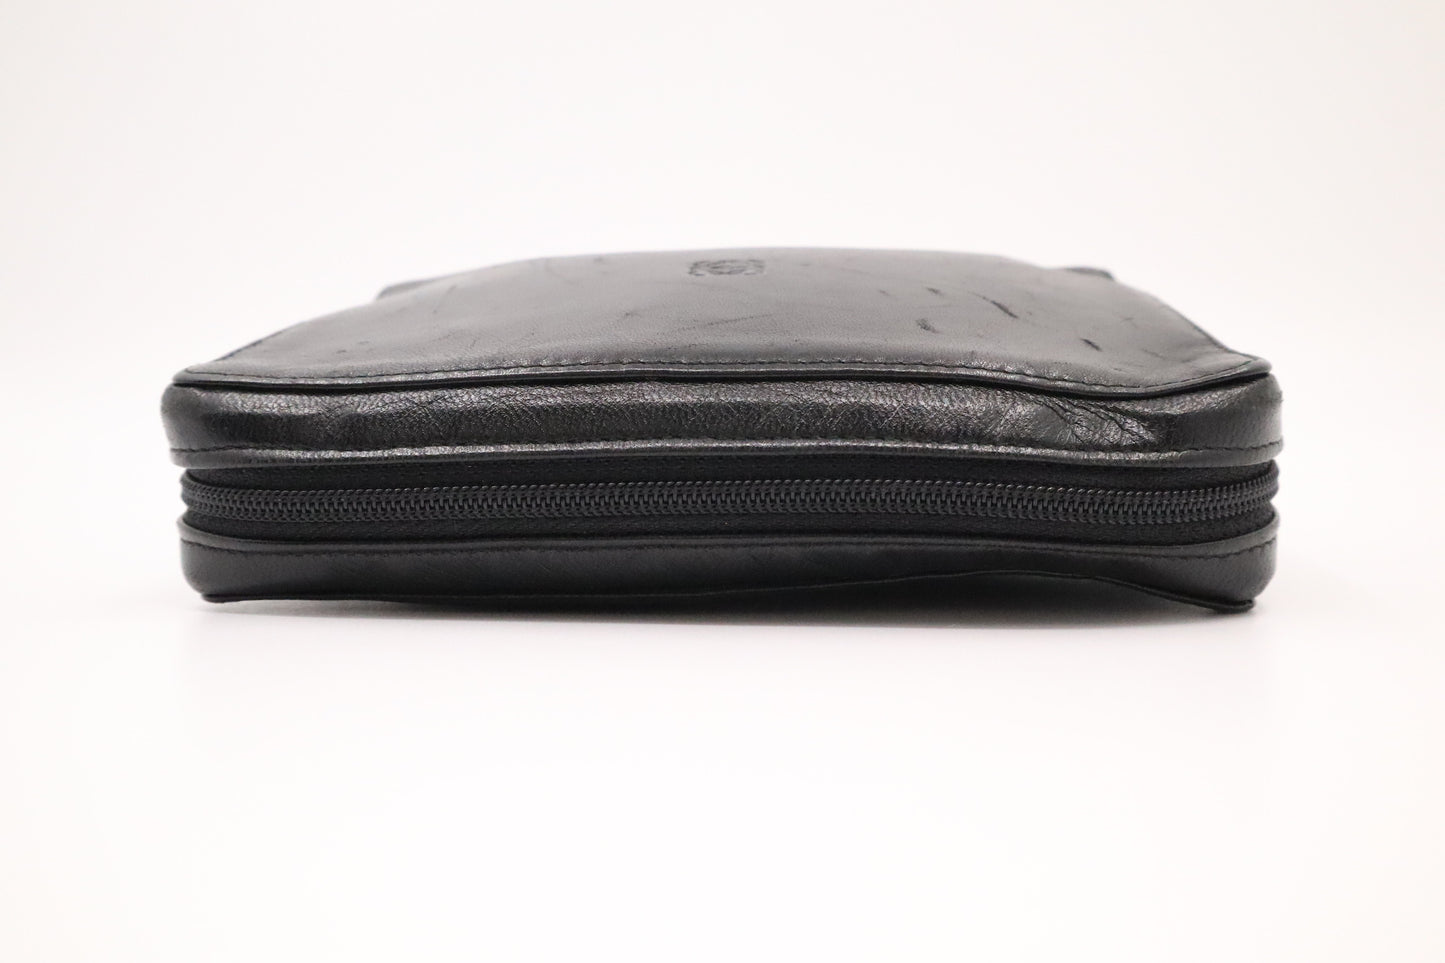 Loewe Pouch in Black Leather